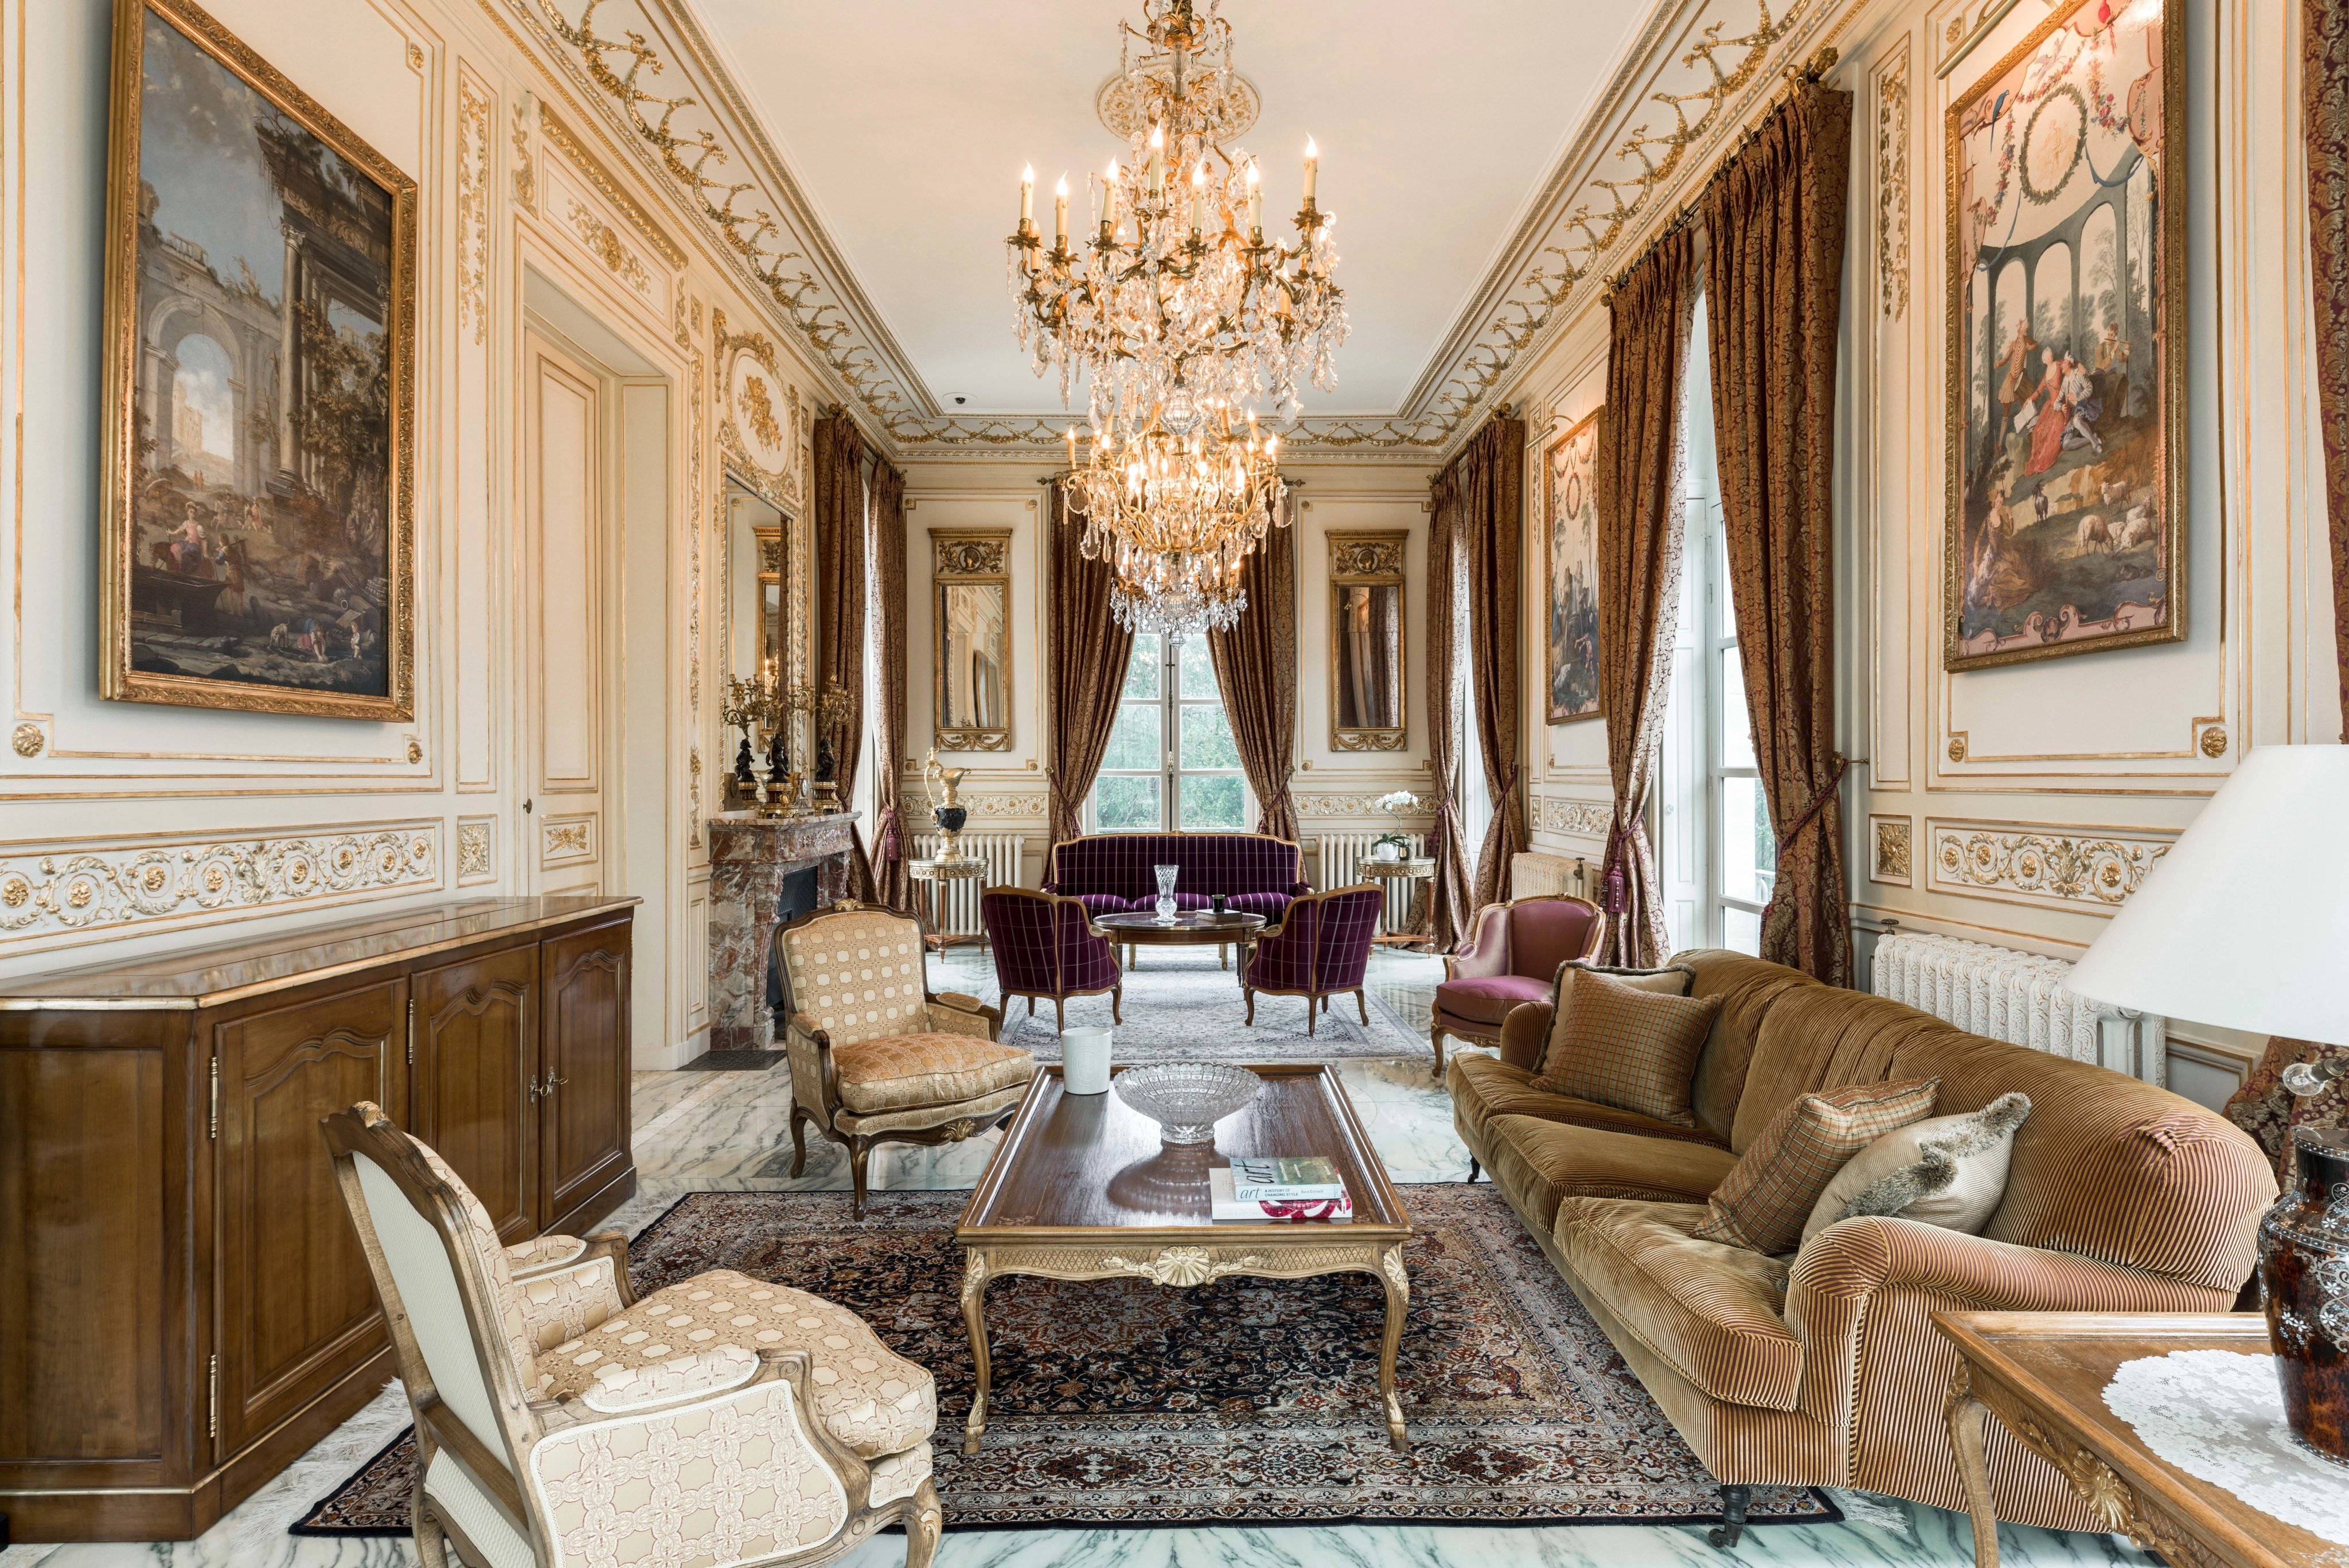 A sublime Palais inspired by Grand Trianon Palace, 20 min from Paris_1484